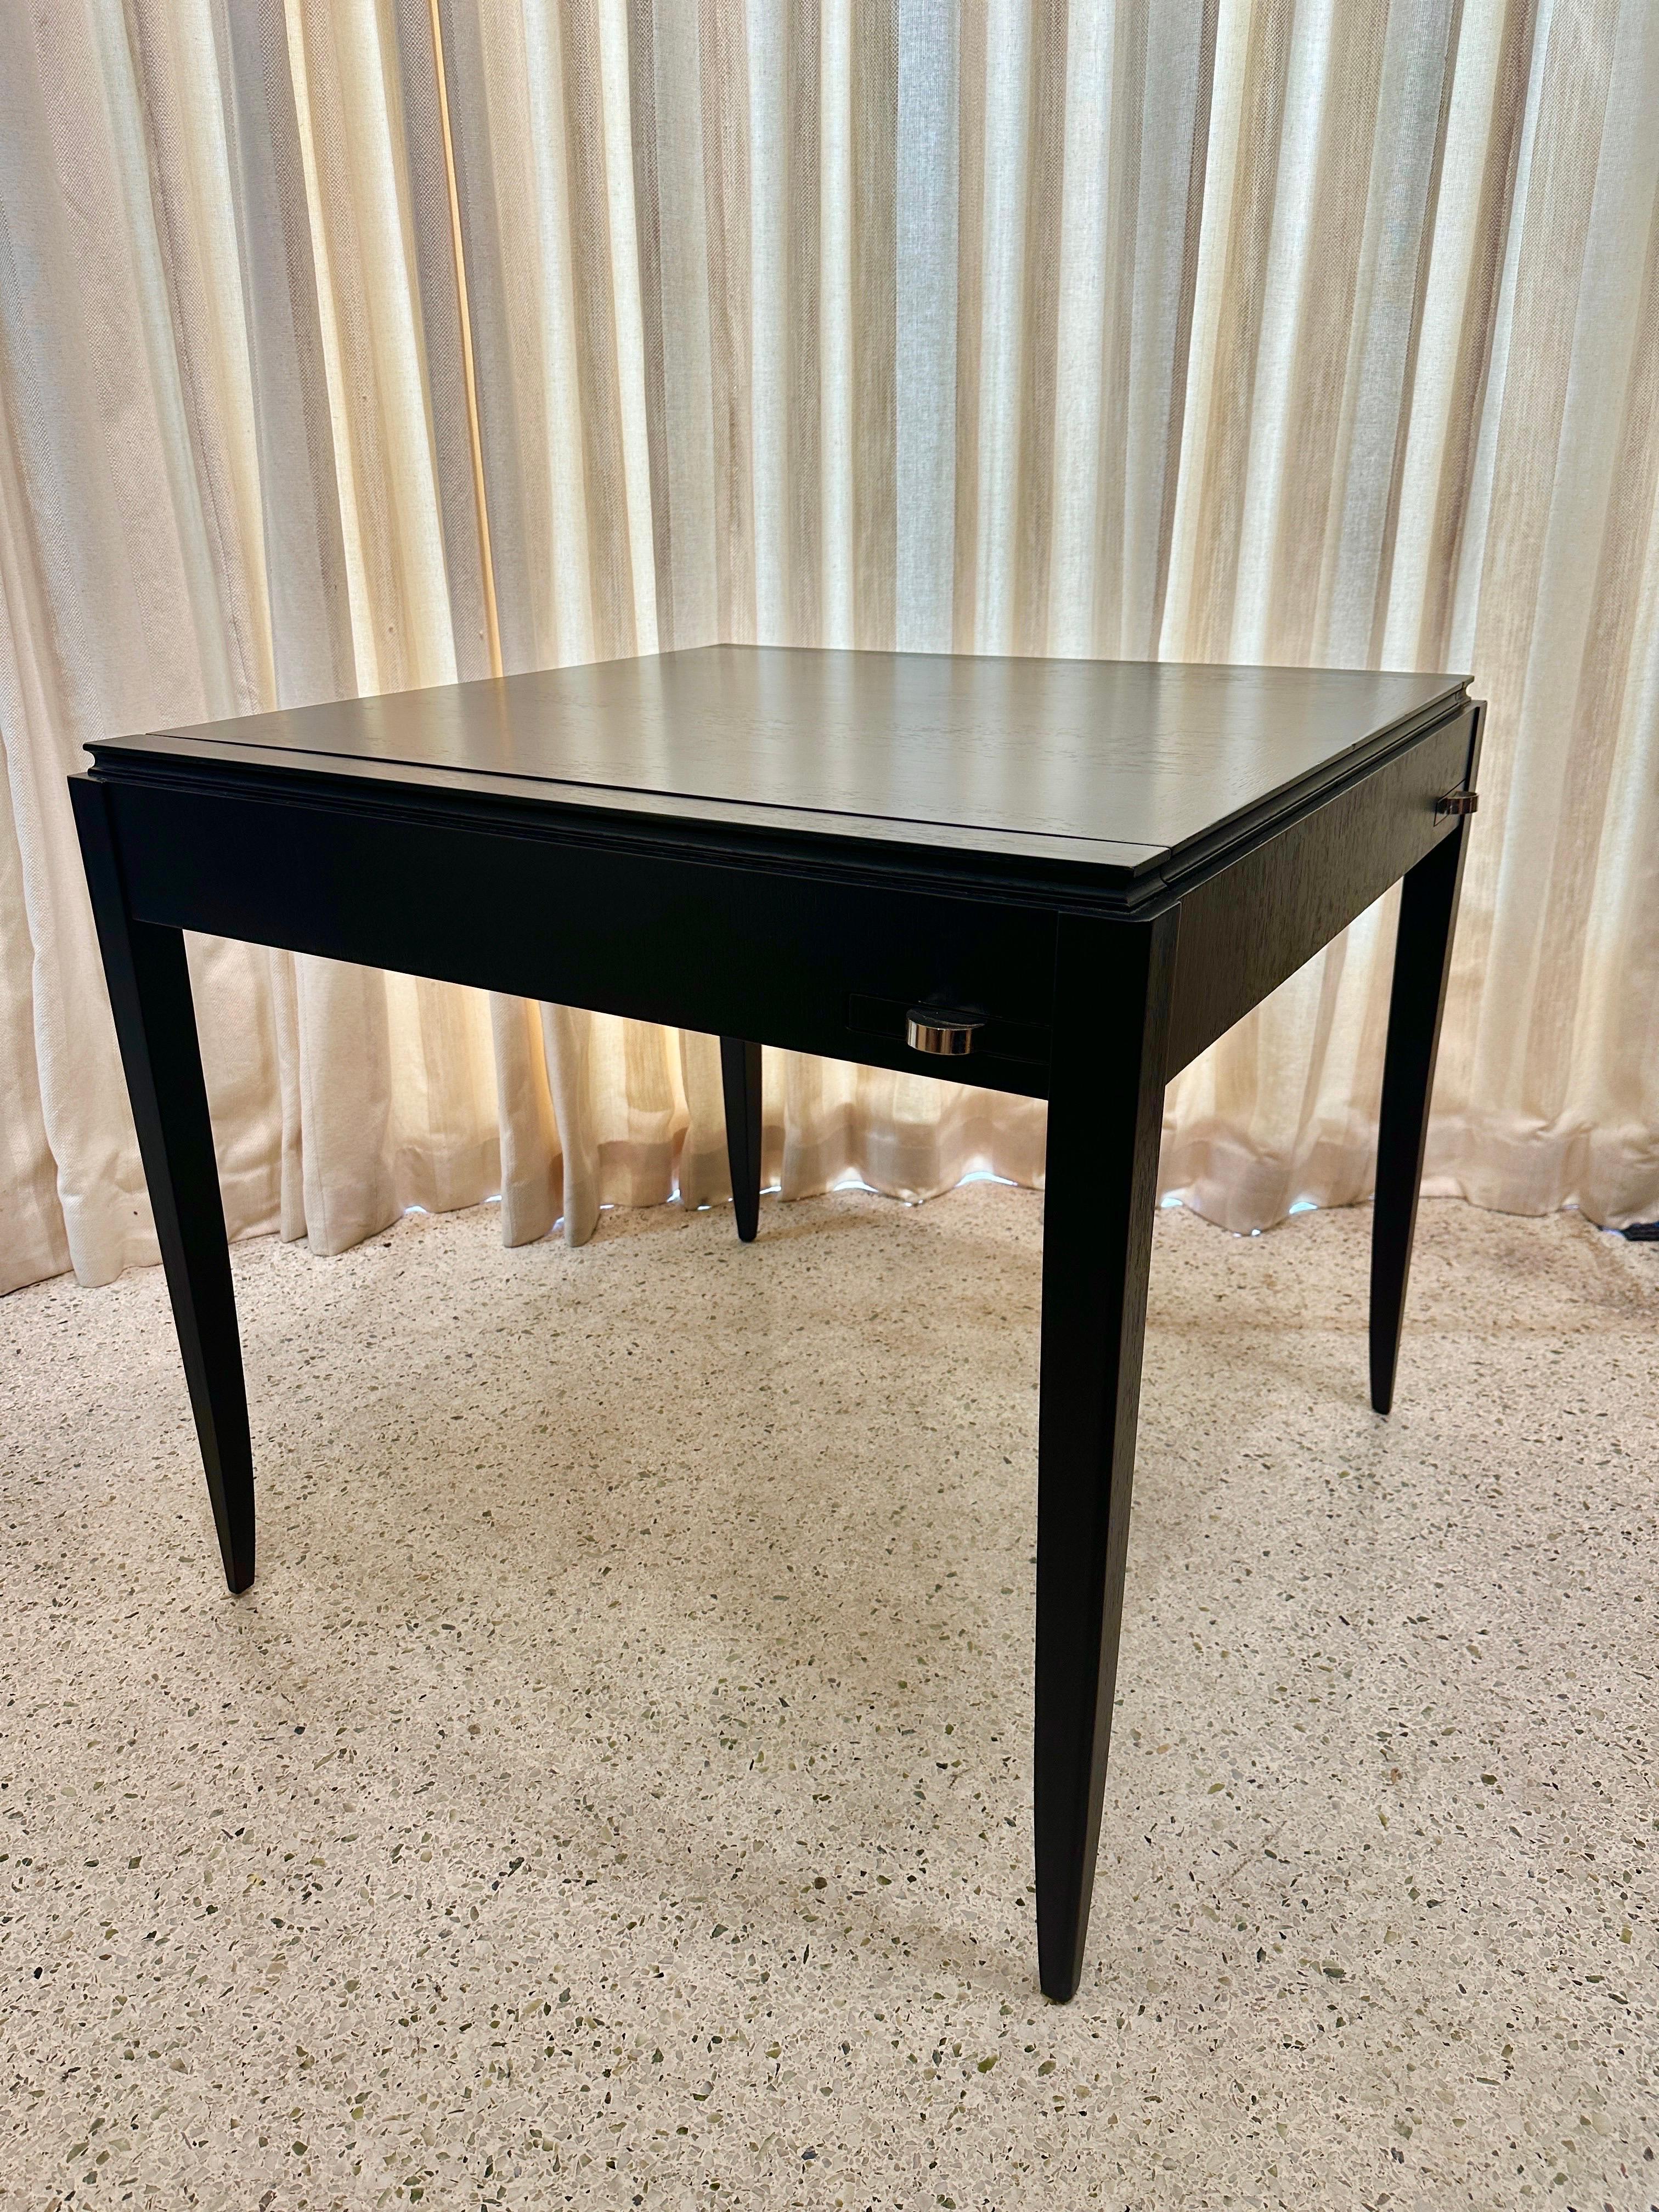 In the style of Jean Pascaud, this 1940's Art Deco period game table features tapering legs, nickel pulls and original ash trays.  The top is able to be flipped for game play and reveals hidden area for game pieces storage.  This has been lightly